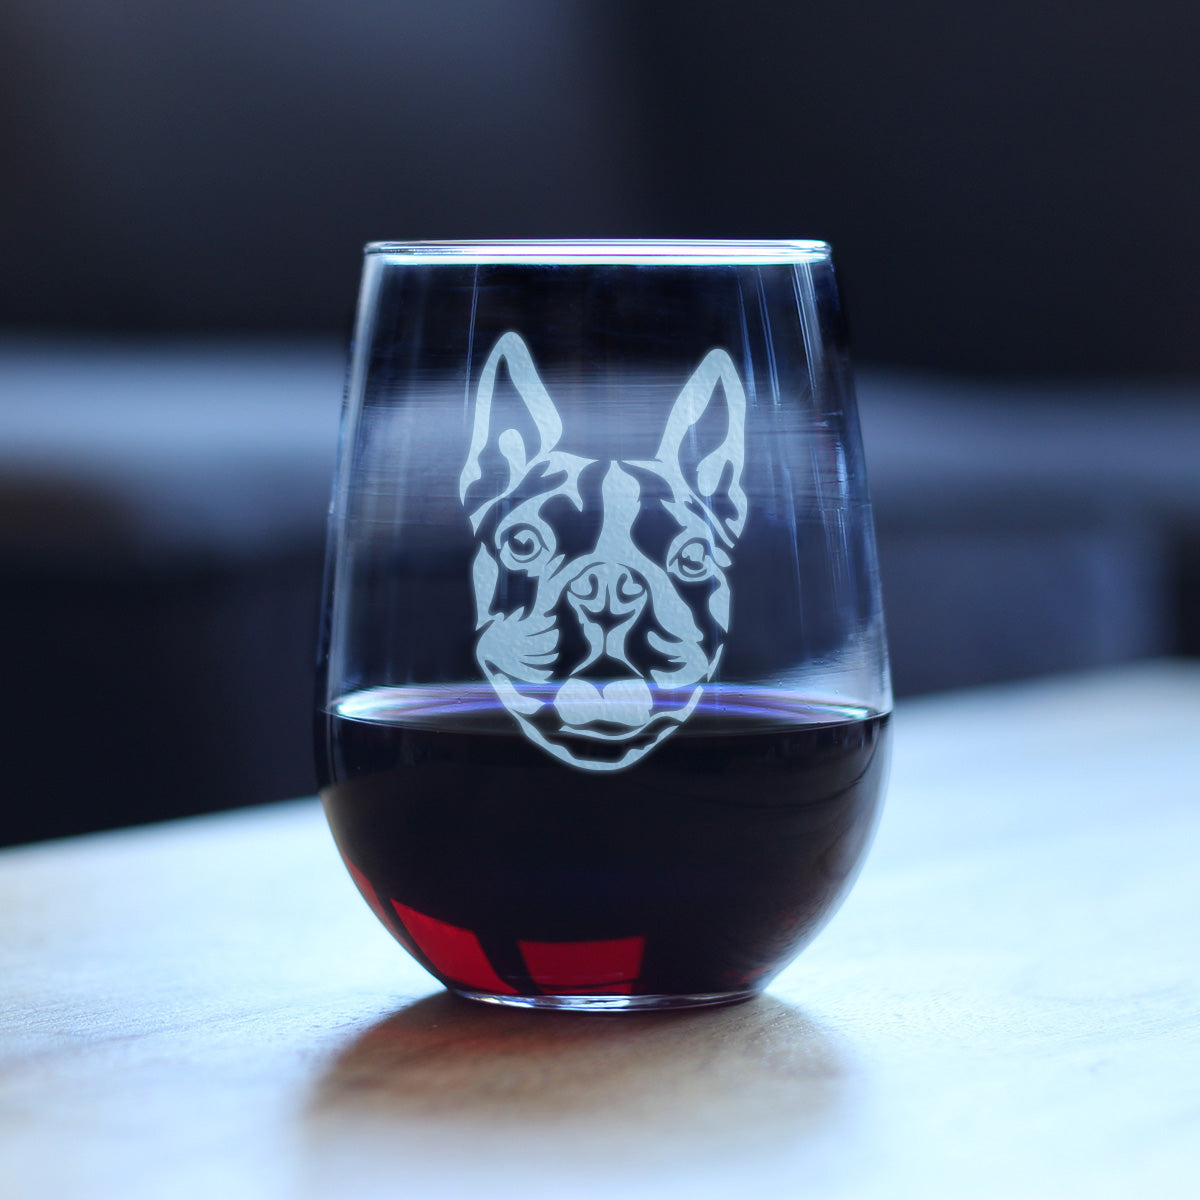 Boston Terrier Face Stemless Wine Glass - Cute Dog Themed Decor and Gifts for Moms &amp; Dads of Boston Terriers - Large 17 Oz